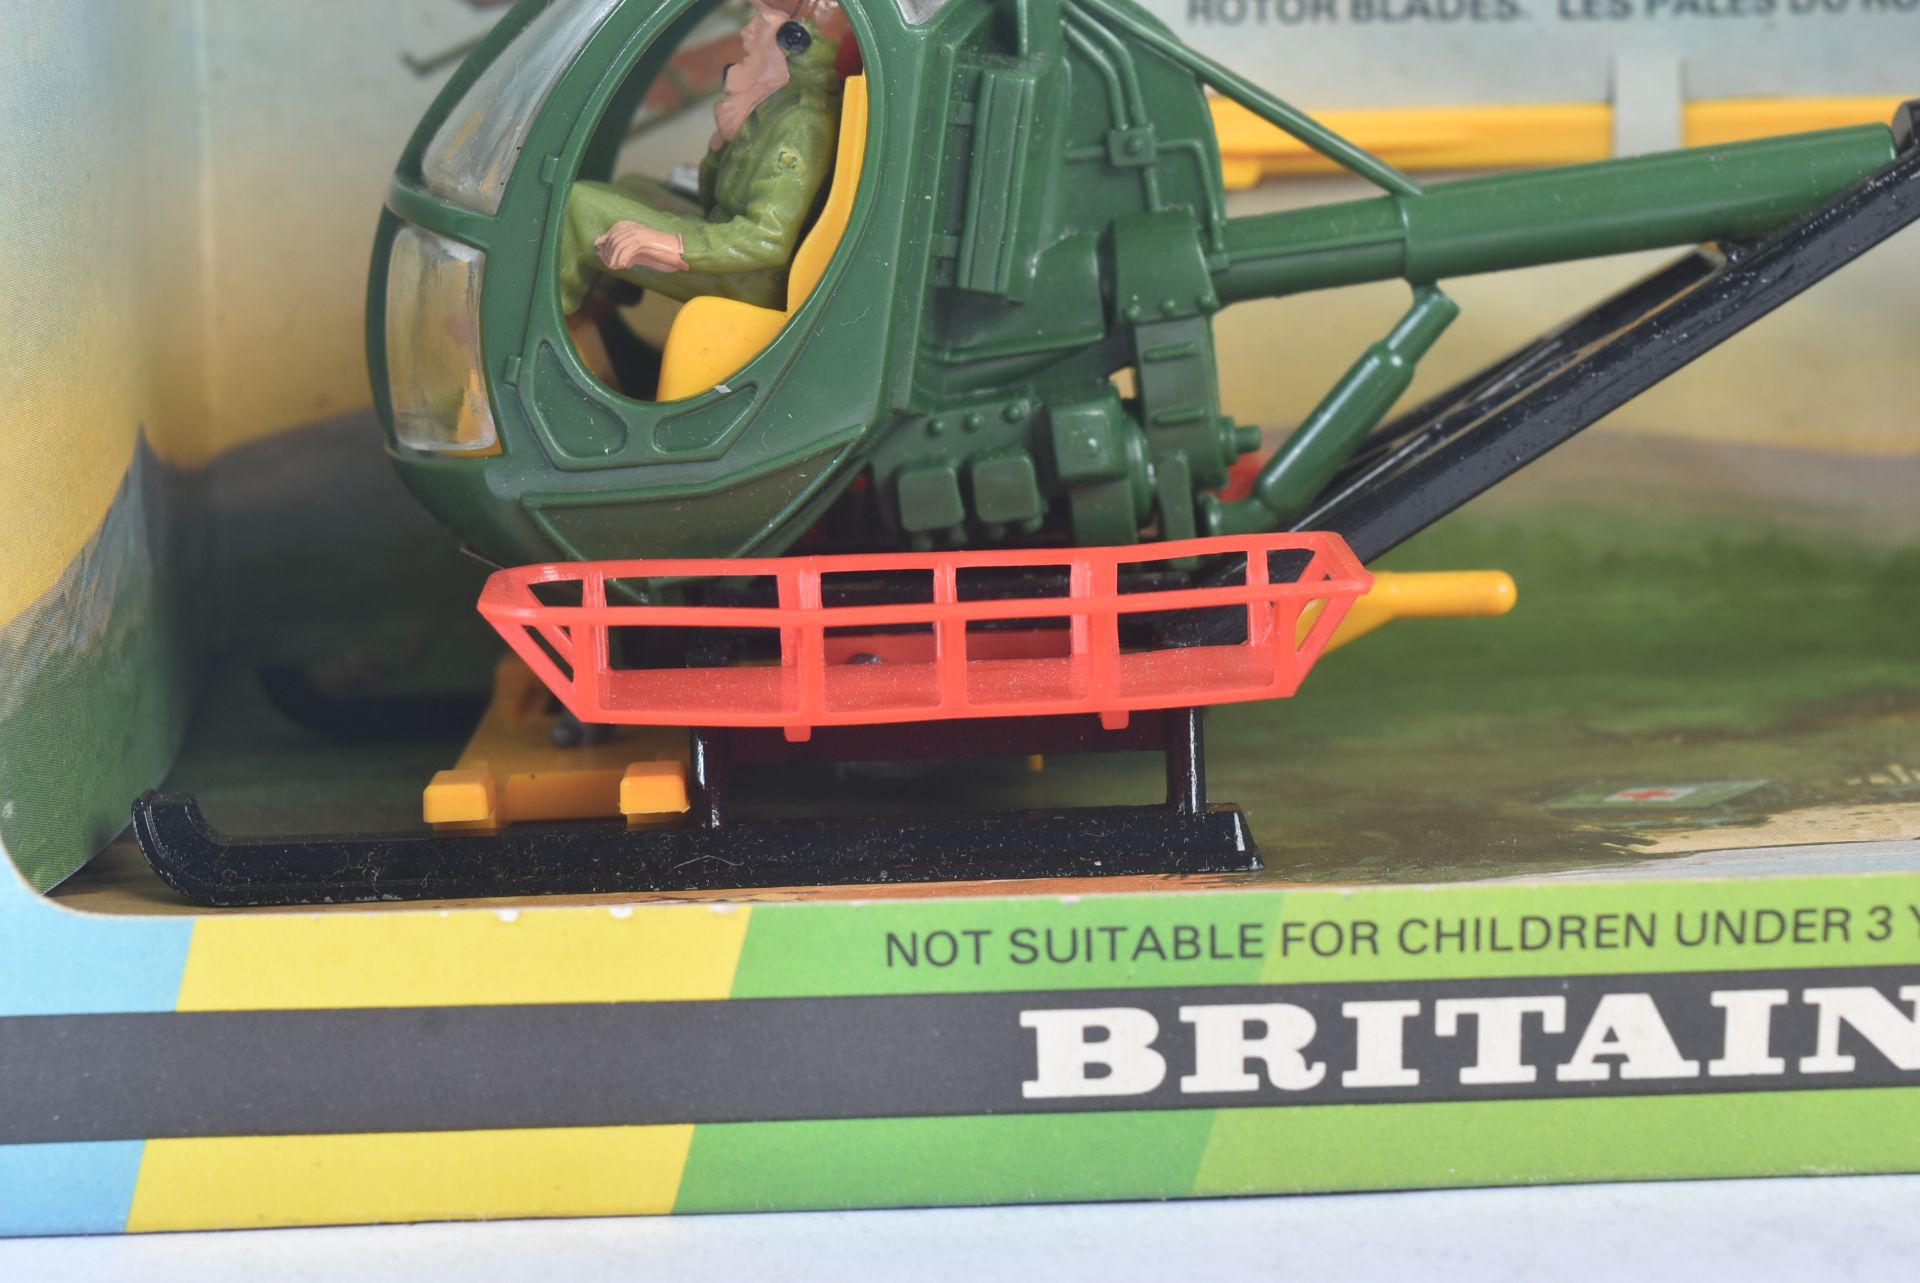 VINTAGE BRITAINS 1/32 SCALE DIECAST HUGHES 300C RESCUE HELICOPTER - Image 4 of 4